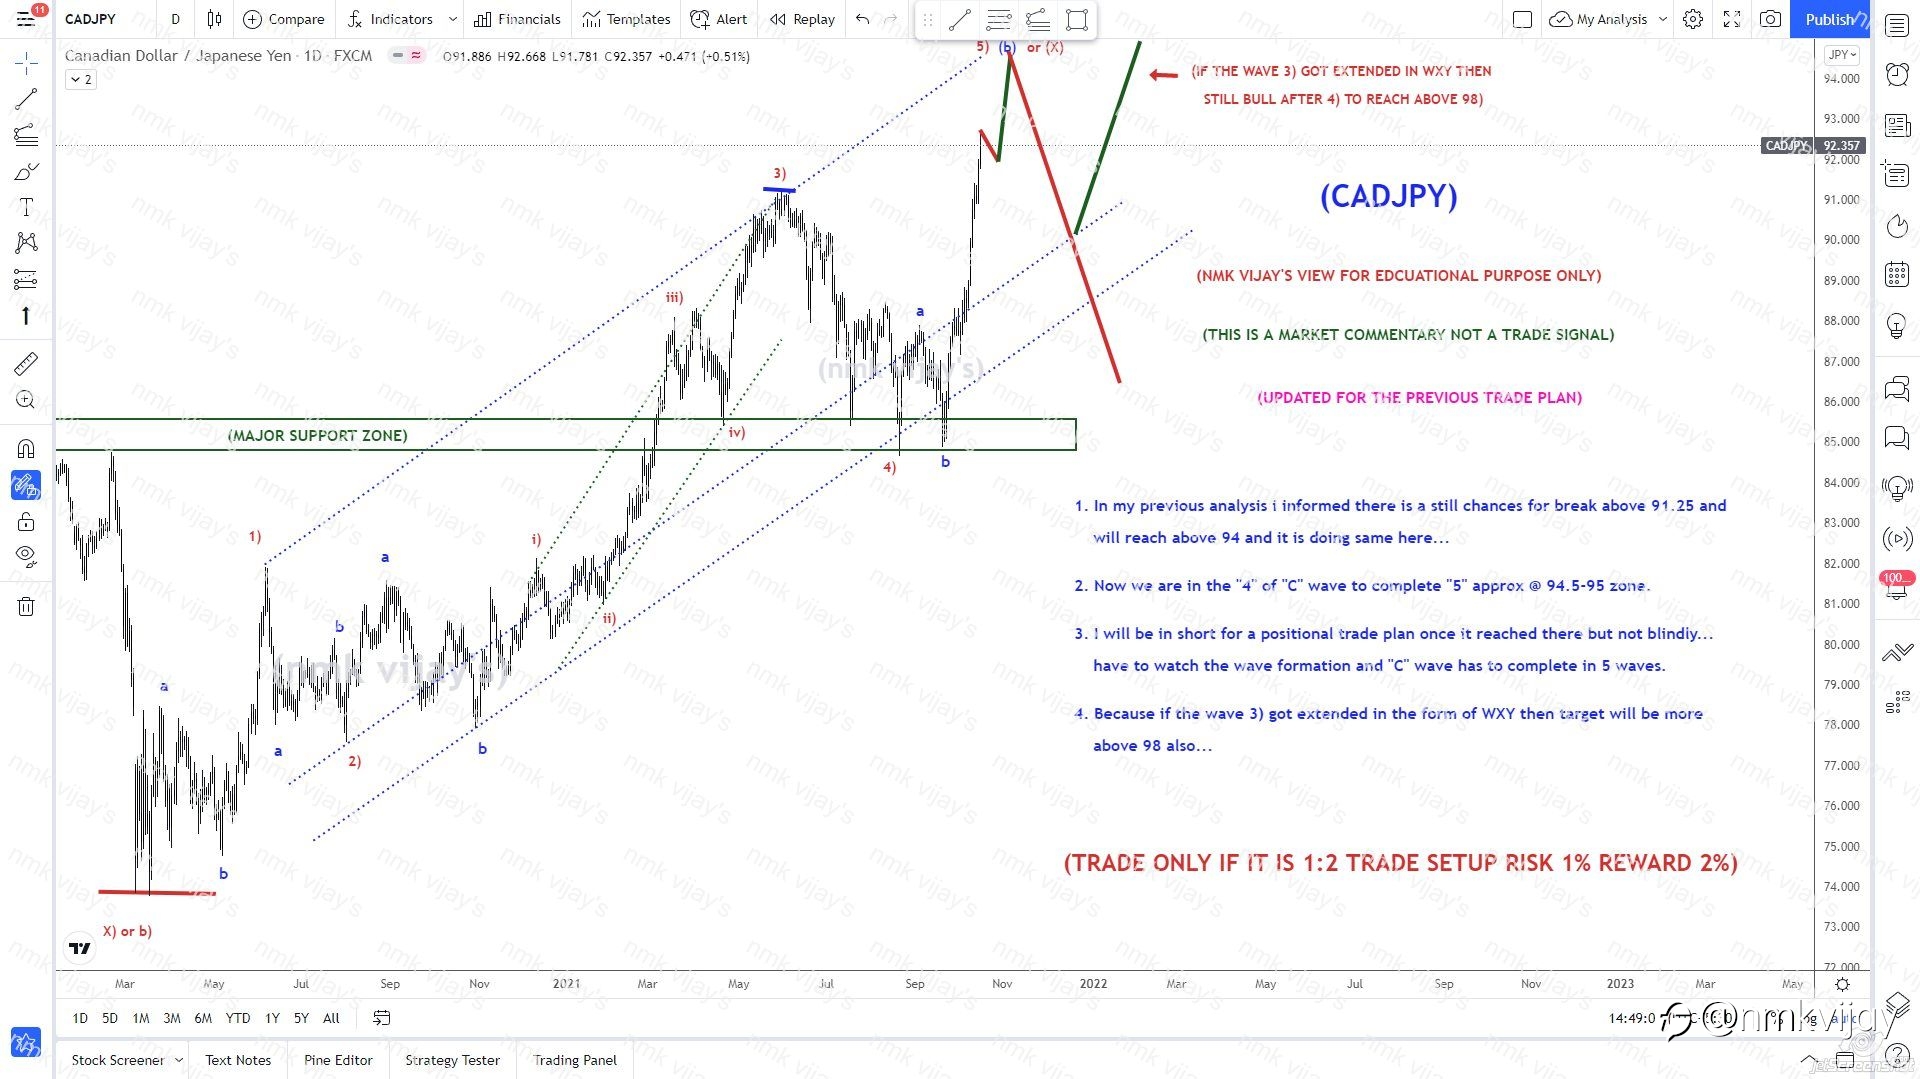 CADJPY-95 to reach t complete (5) or (3) if it got extended 98 ?